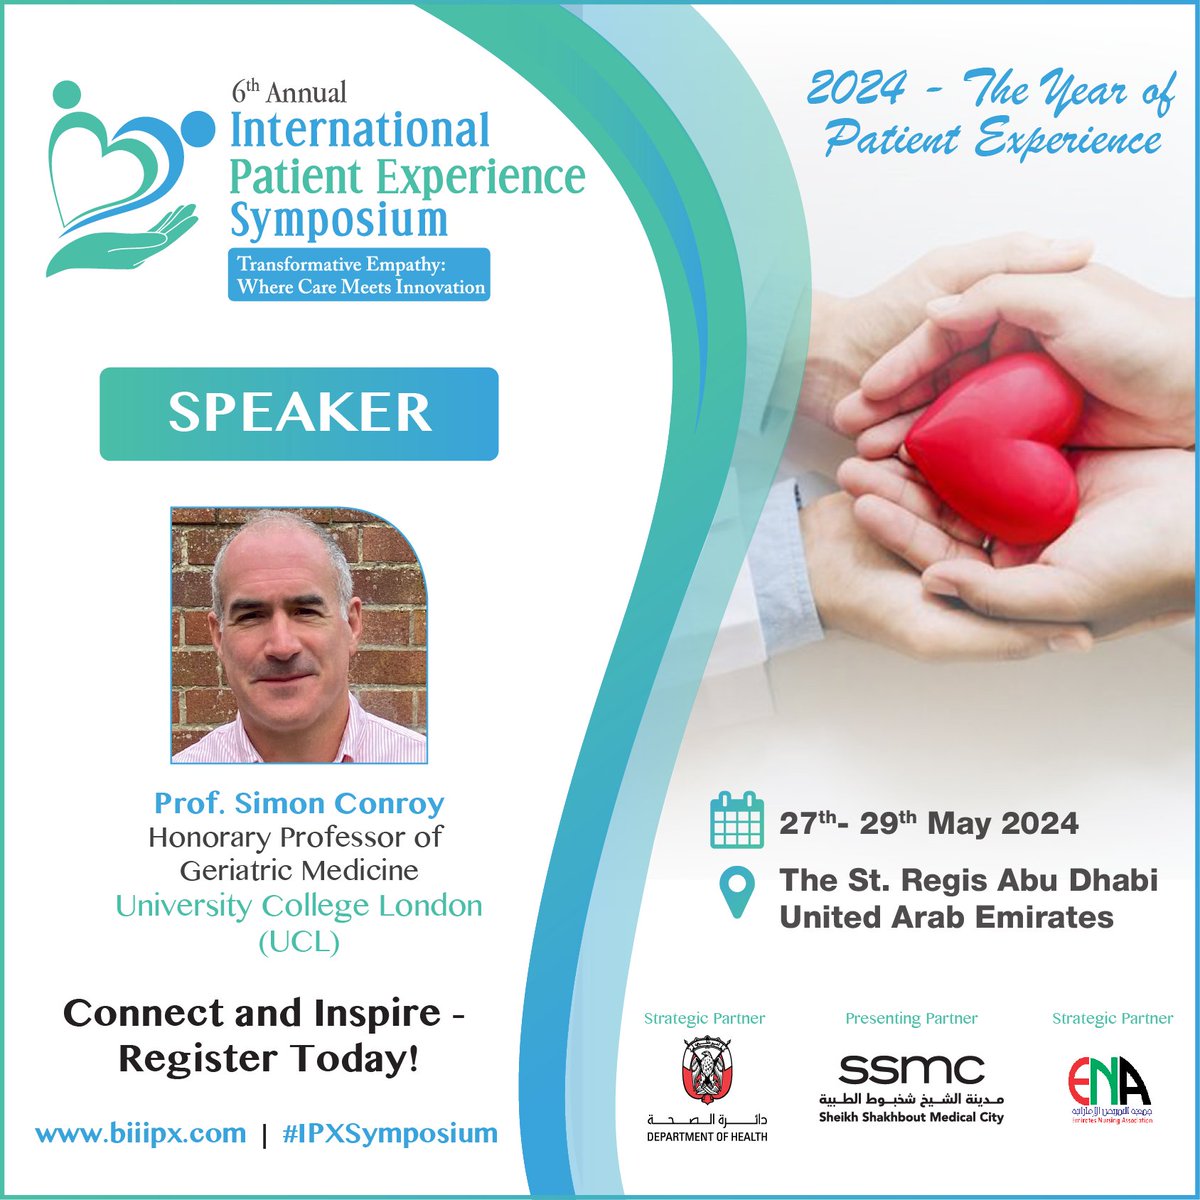 We're thrilled to welcome Prof. @GERED_DOC, Honorary Professor of #GeriatricMedicine at @ucl , as a distinguished speaker and #workshop facilitator at the 6th Annual International #PatientExperience Symposium! 🔗Register Now: biiipx.com/register!
#IPXSymposium #IPX #PX2024